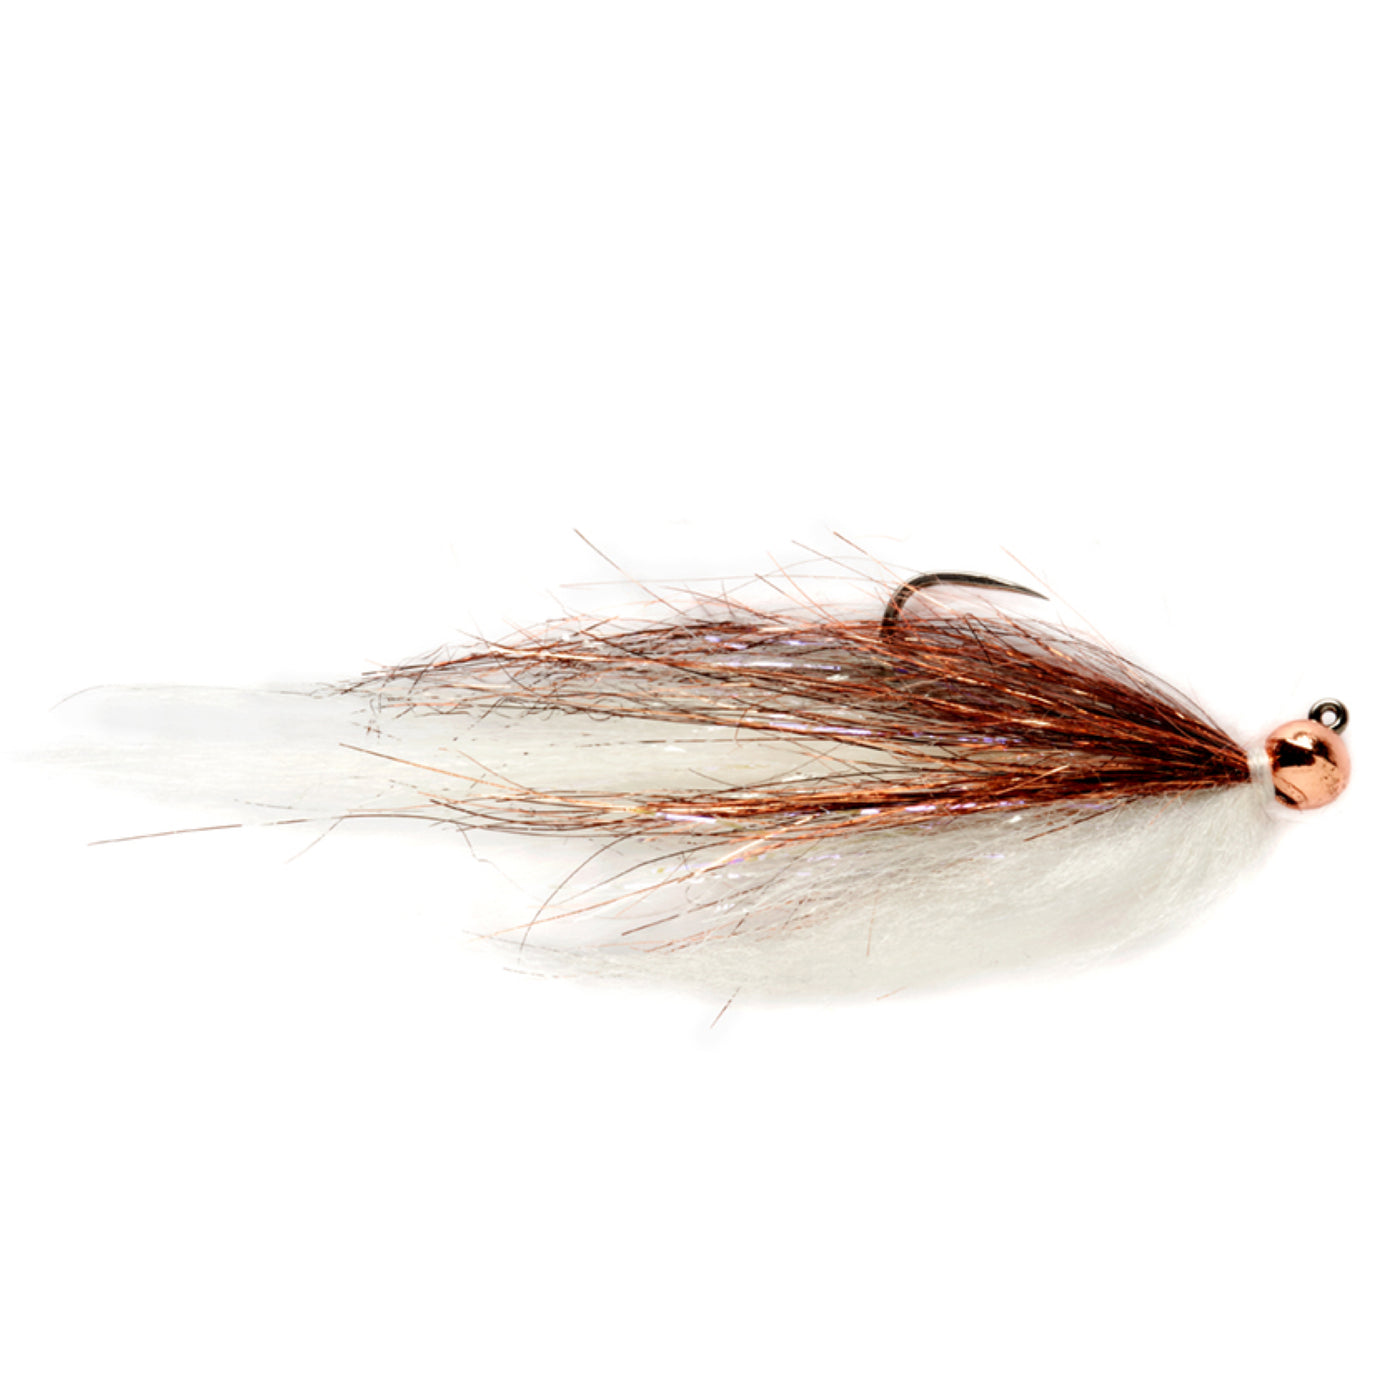 Streamers / Bucktails  Dan's Fly Shop and Guide Service - Fishing